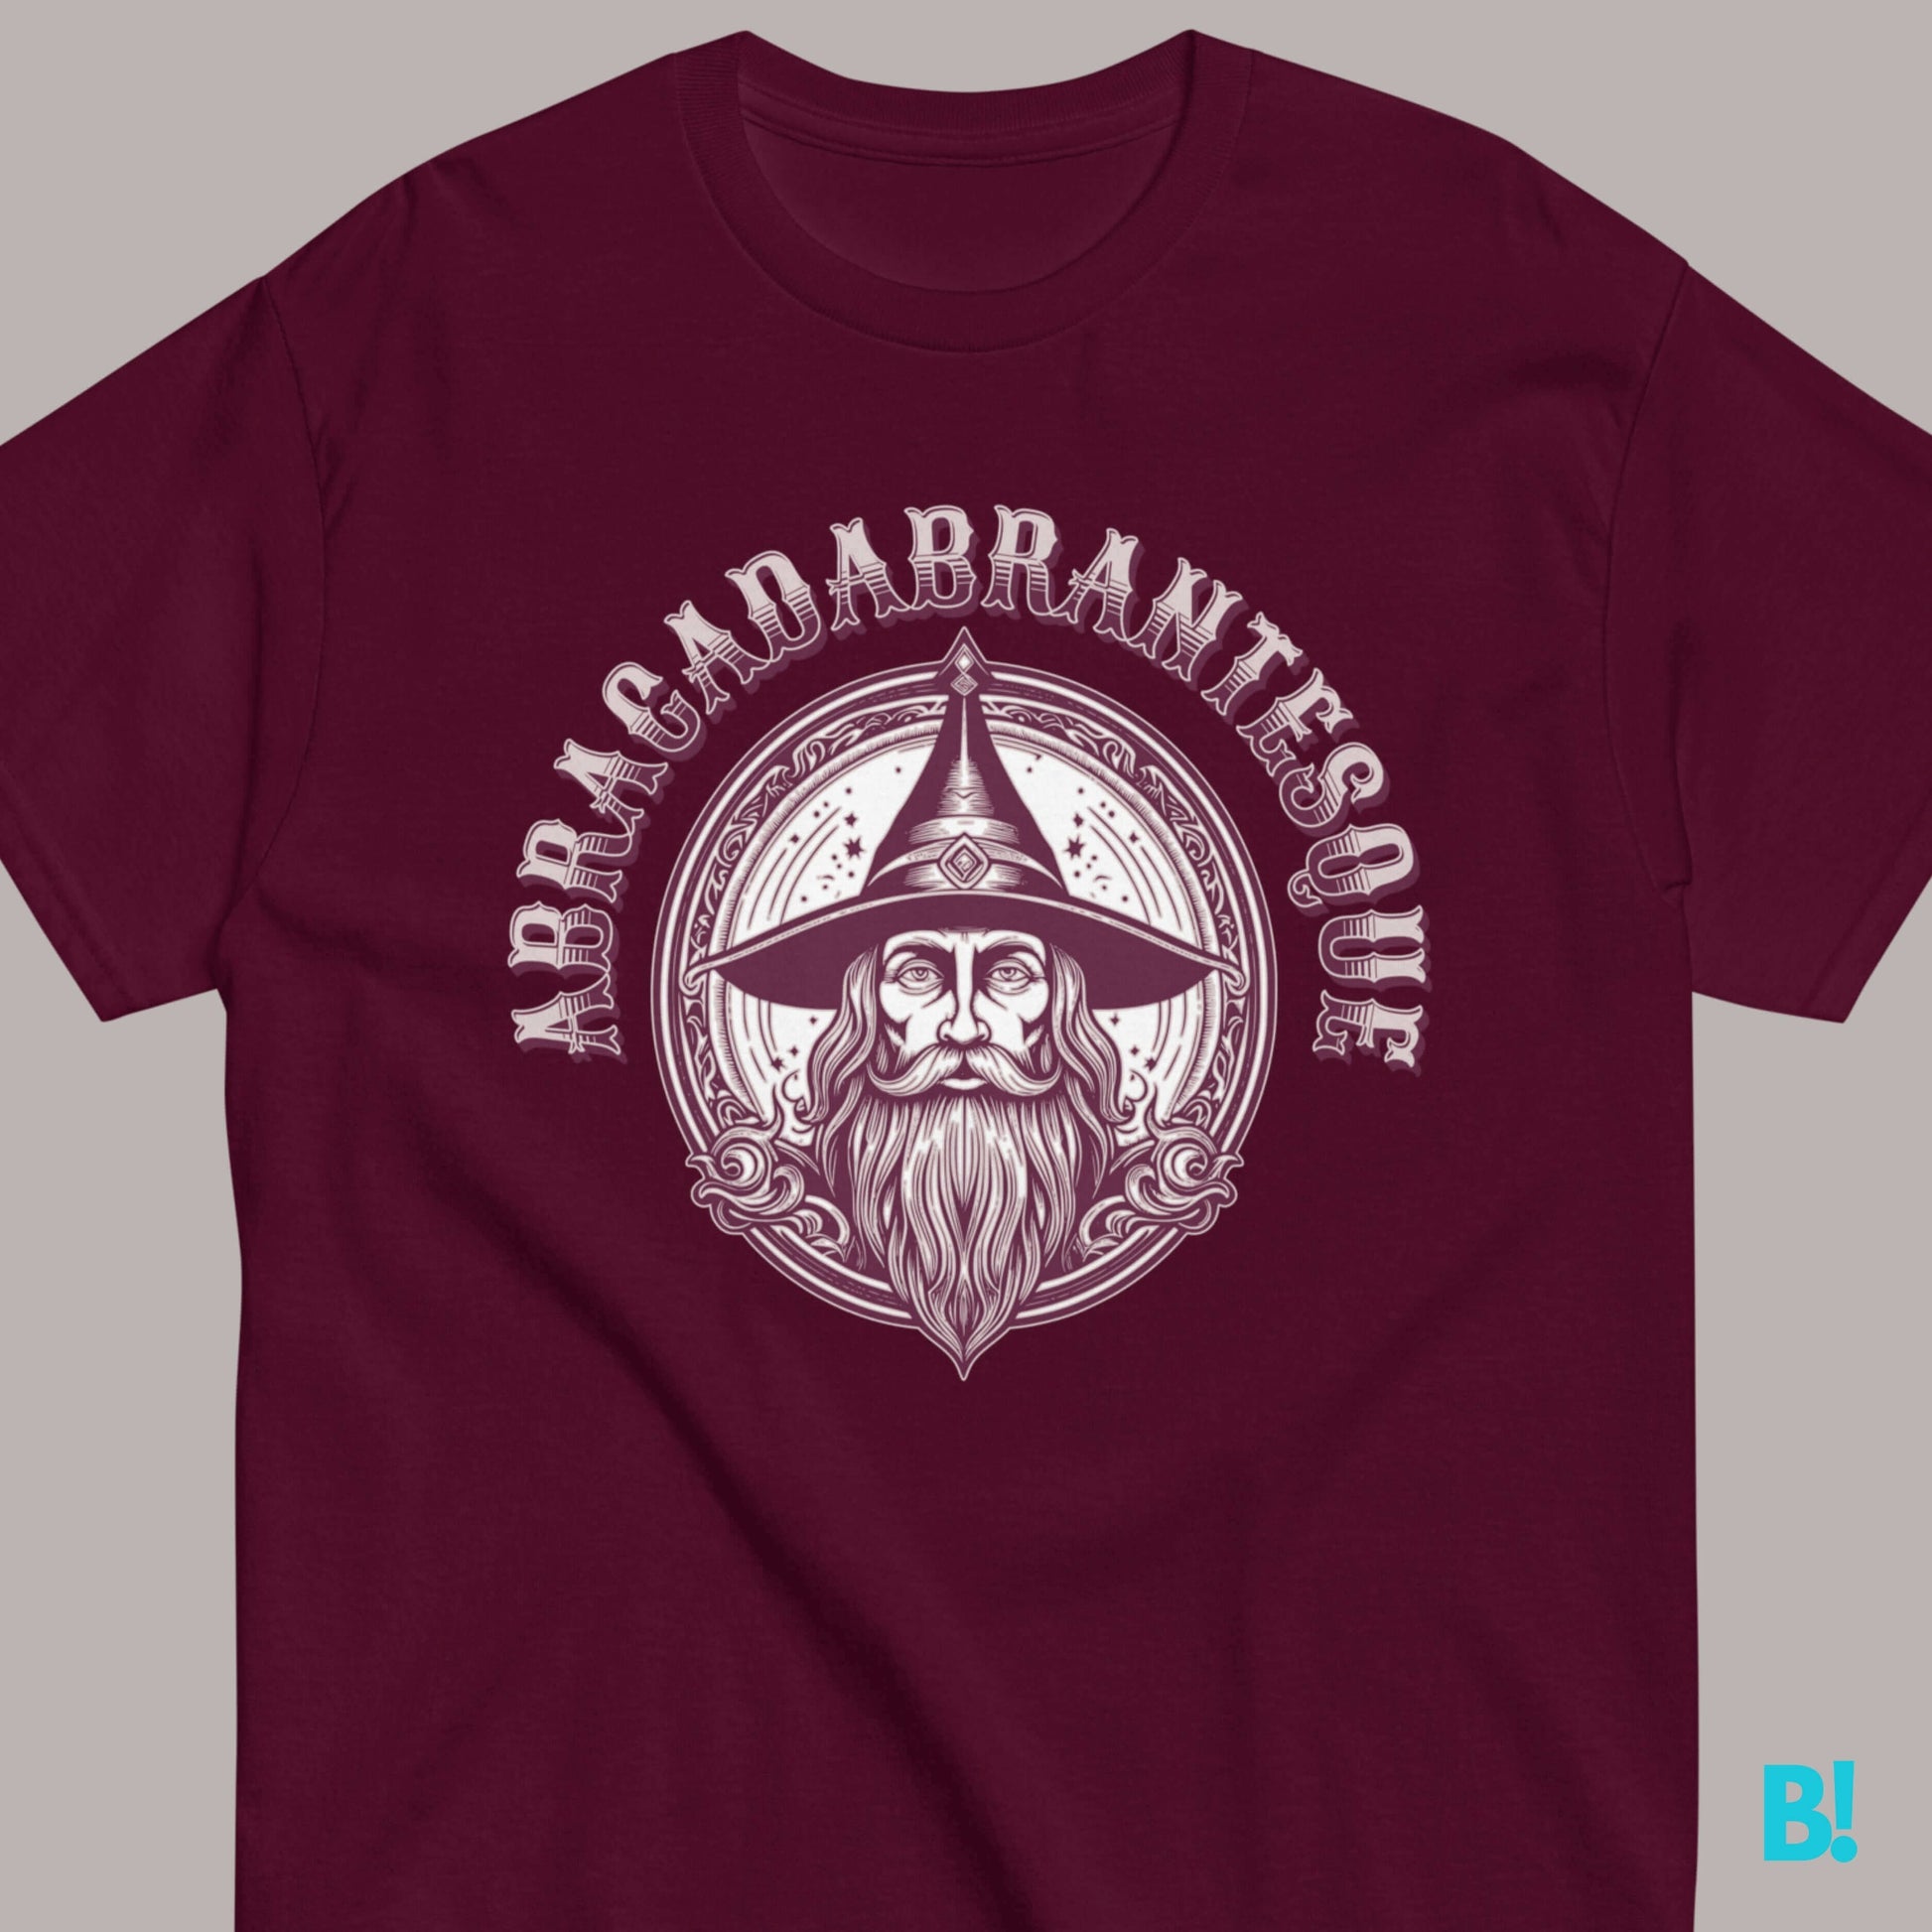 Abracadabrantesque French Tattoo Retro Inspired Vintage T-Shirt Bonjour, enchanters! Cast a spell of style with Abracadabrantesque. This magical tee combines French mystique with a touch of magic. Let your imagination take flight and make fashion disappea